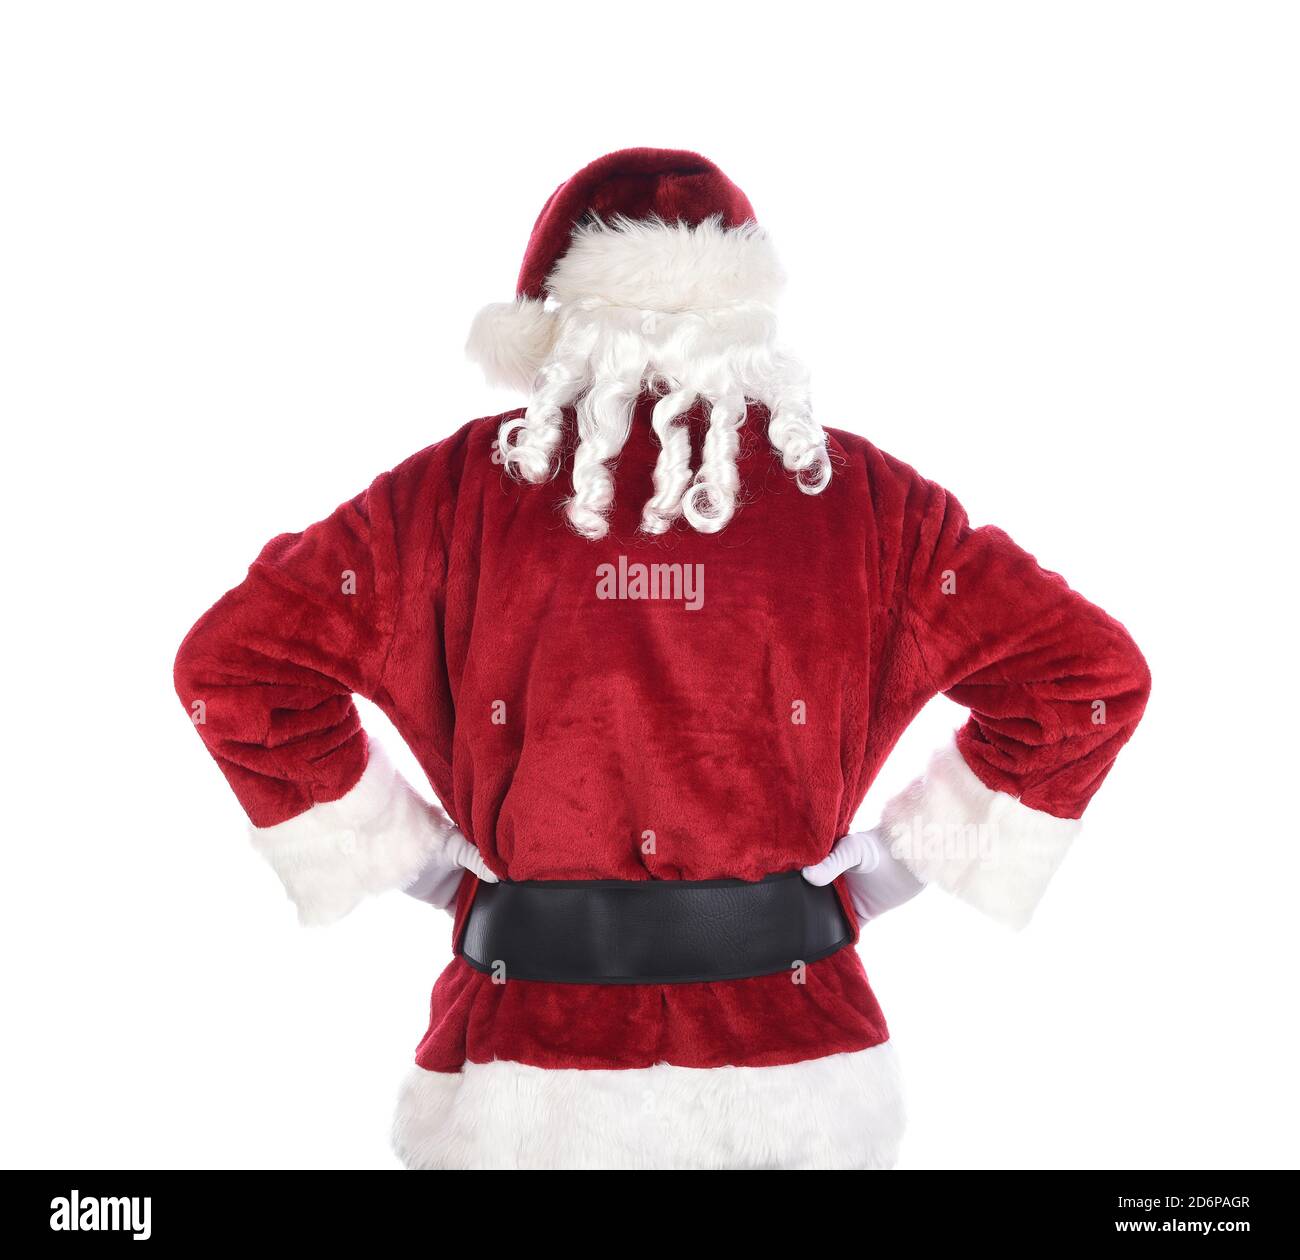 Santa Claus seen from behind standing akimbo with closed fists on hips. Isolated on white. Stock Photo